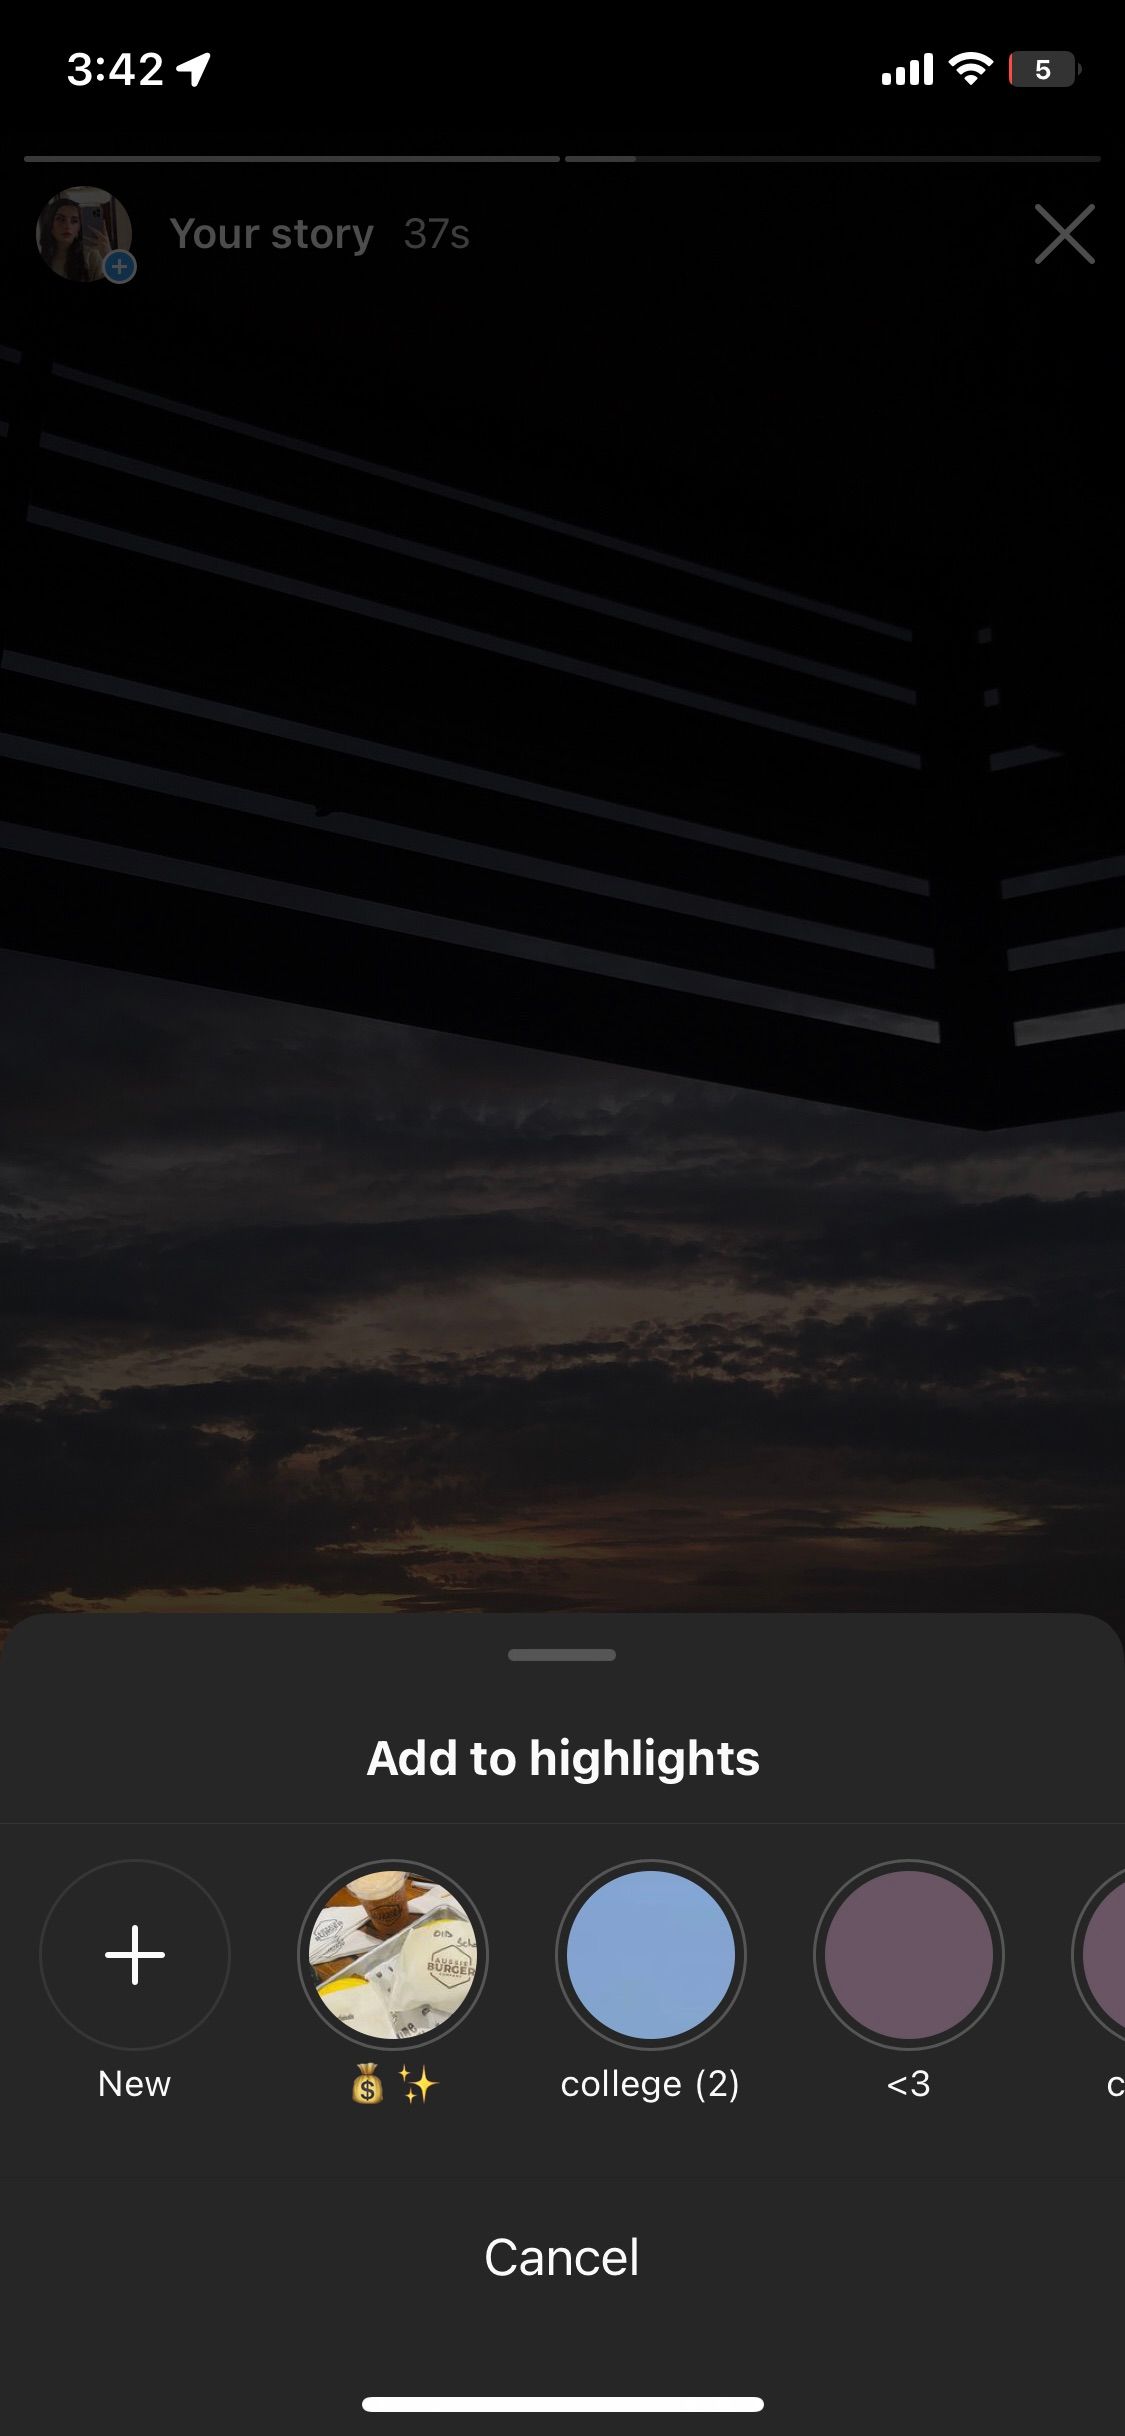 How to Add Instagram Highlights Without Followers Seeing Your Story